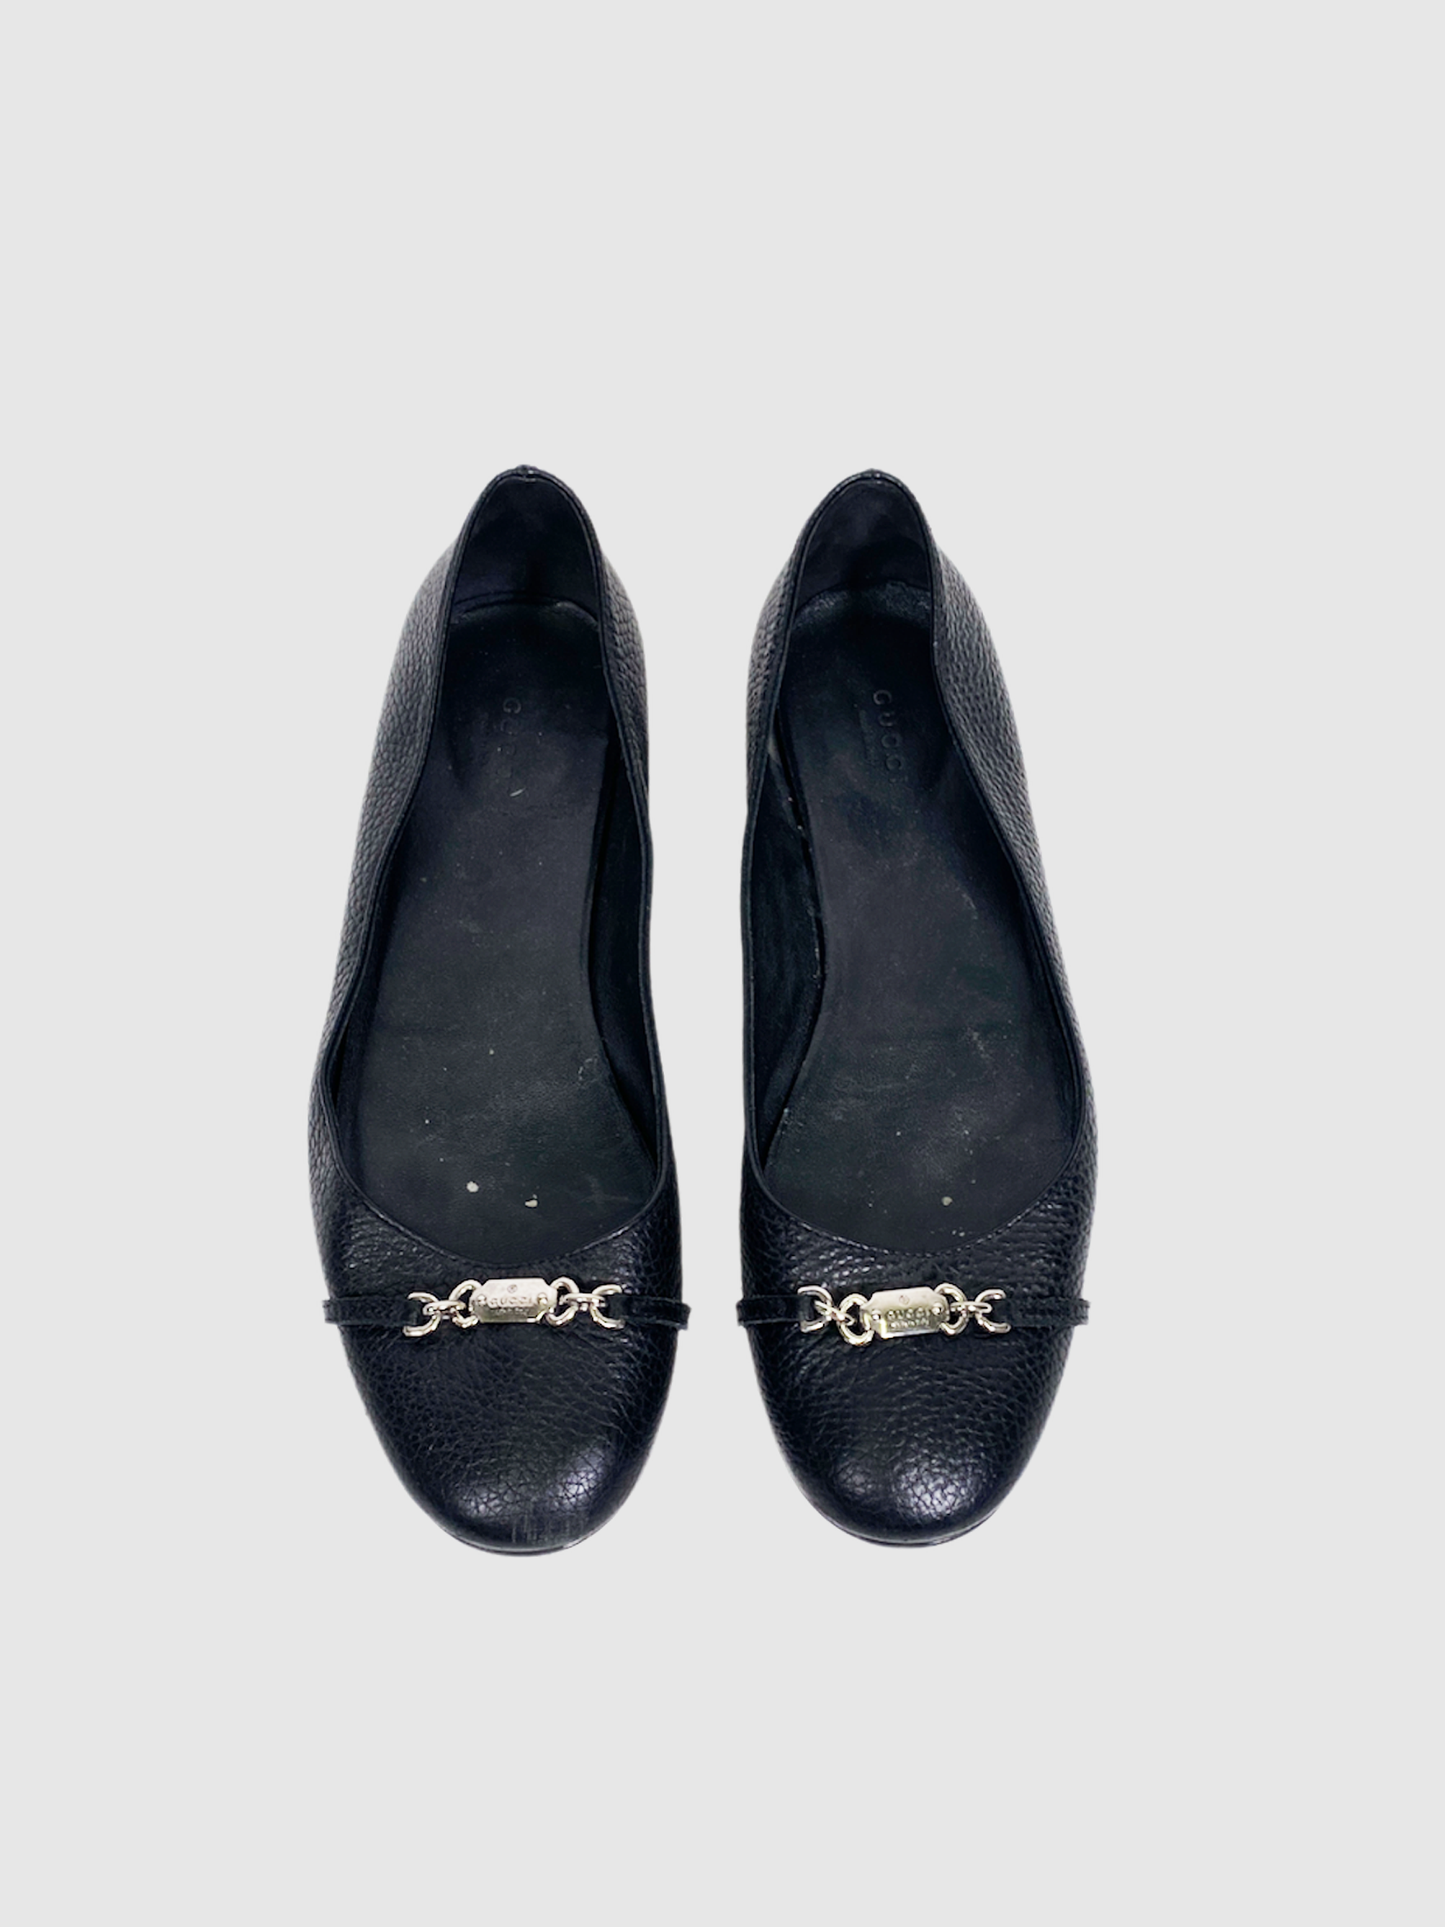 Gucci Black Pebbled Leather Flats - Size 40.5